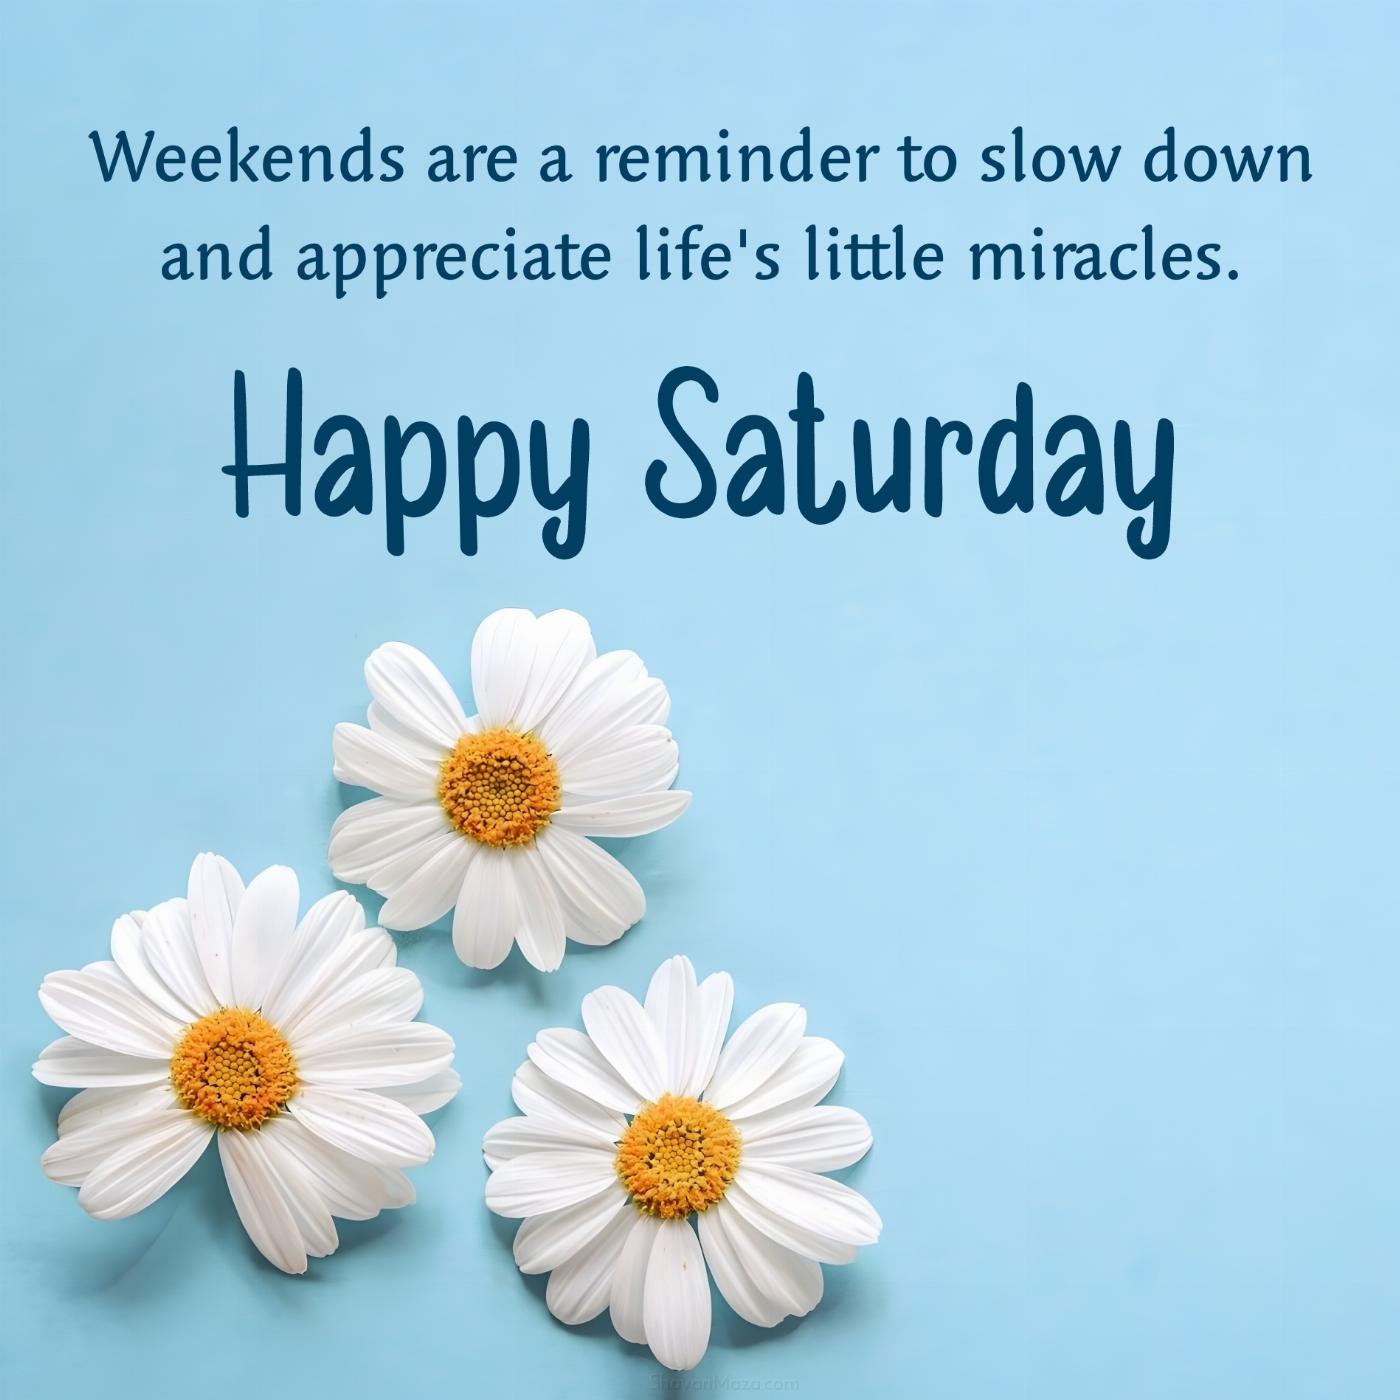 Weekends are a reminder to slow down and appreciate life's little miracles